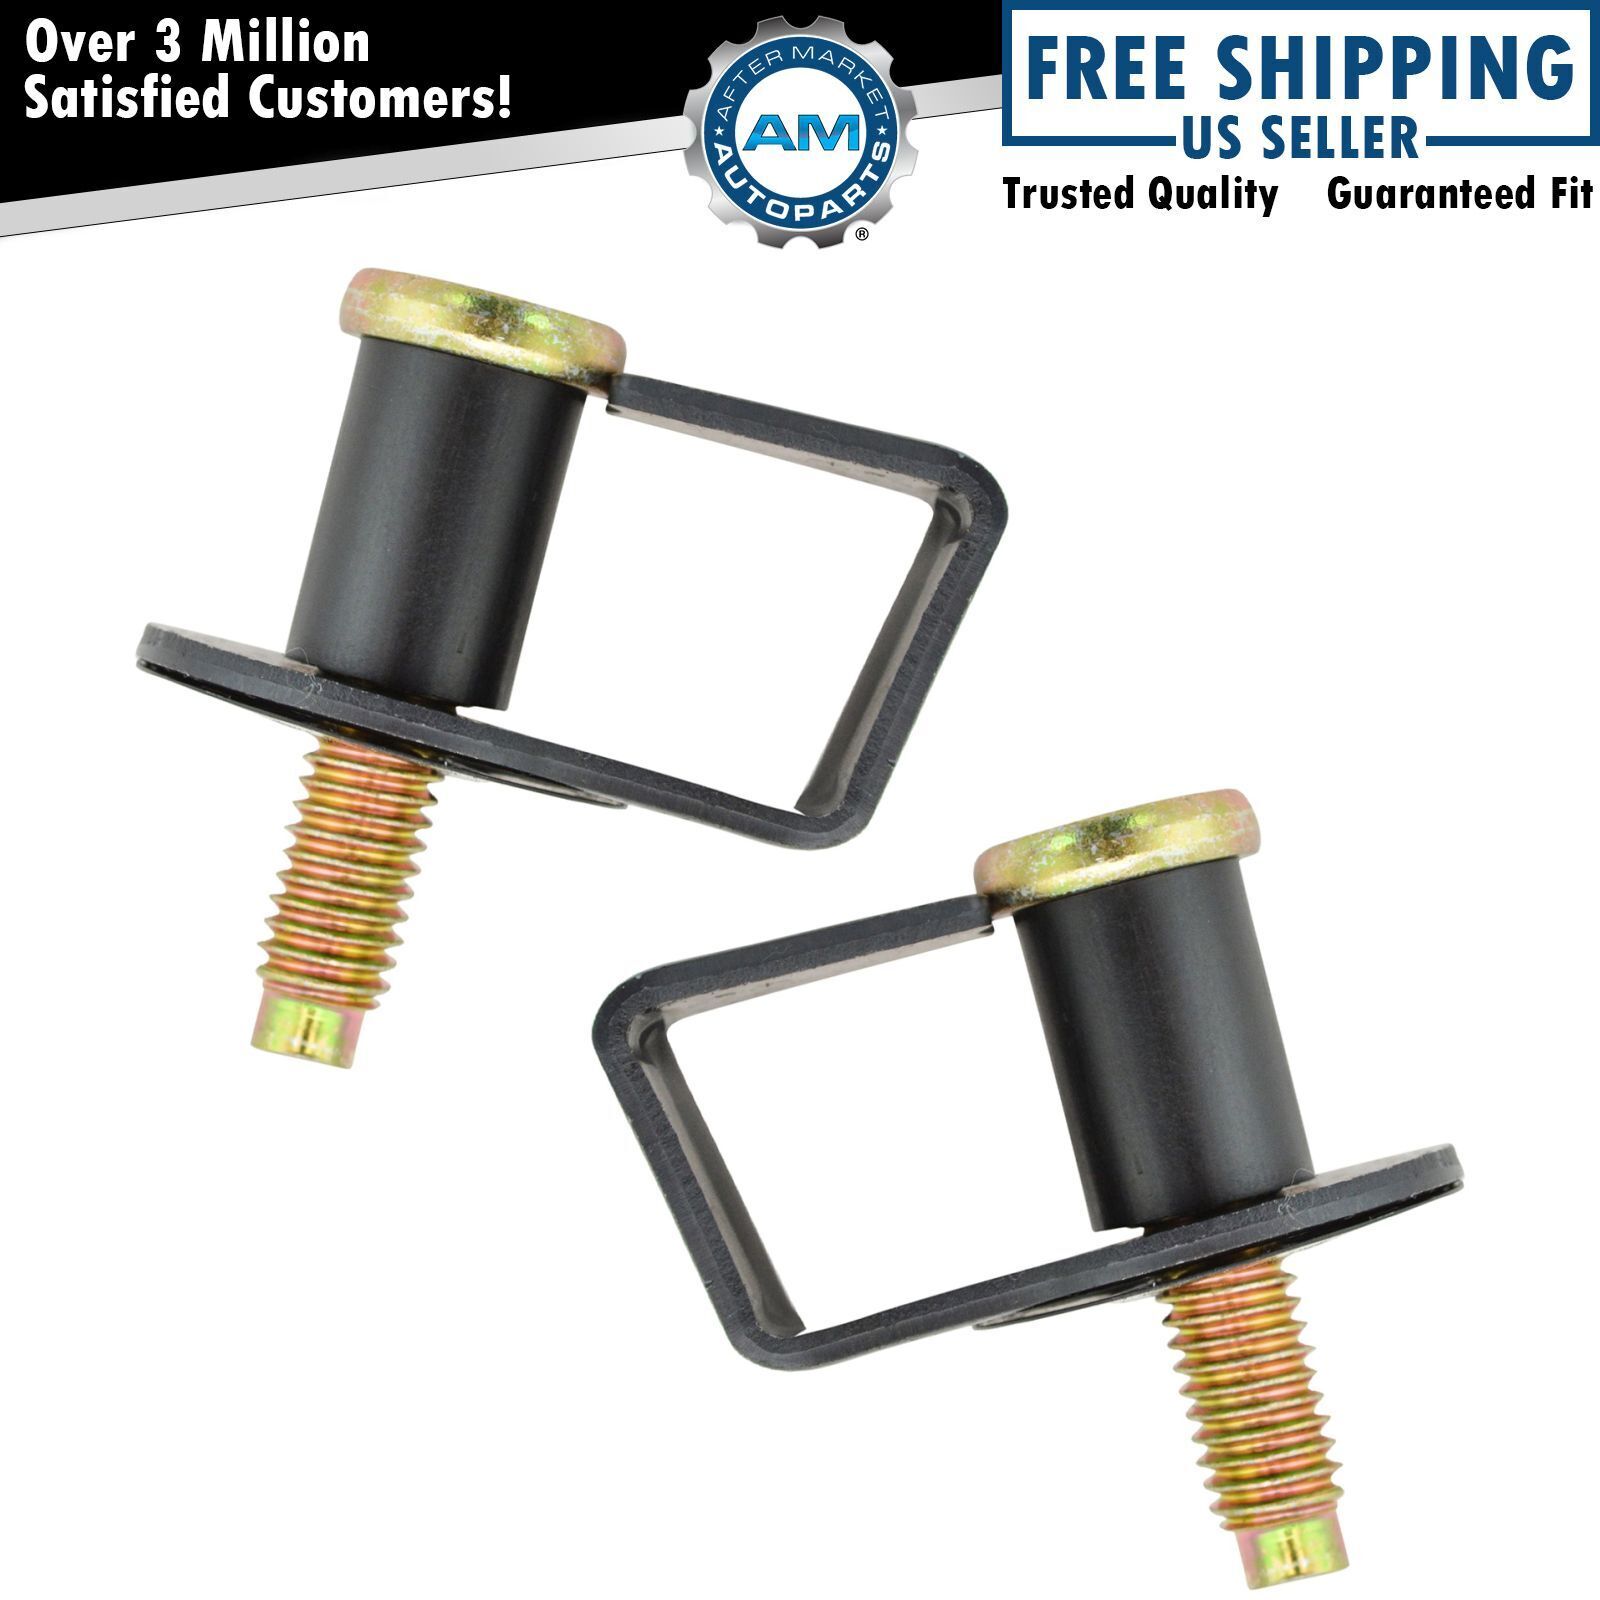 Door Latch Striker Bolts Pair Set of 2 NEW for Ford Lincoln Mercury